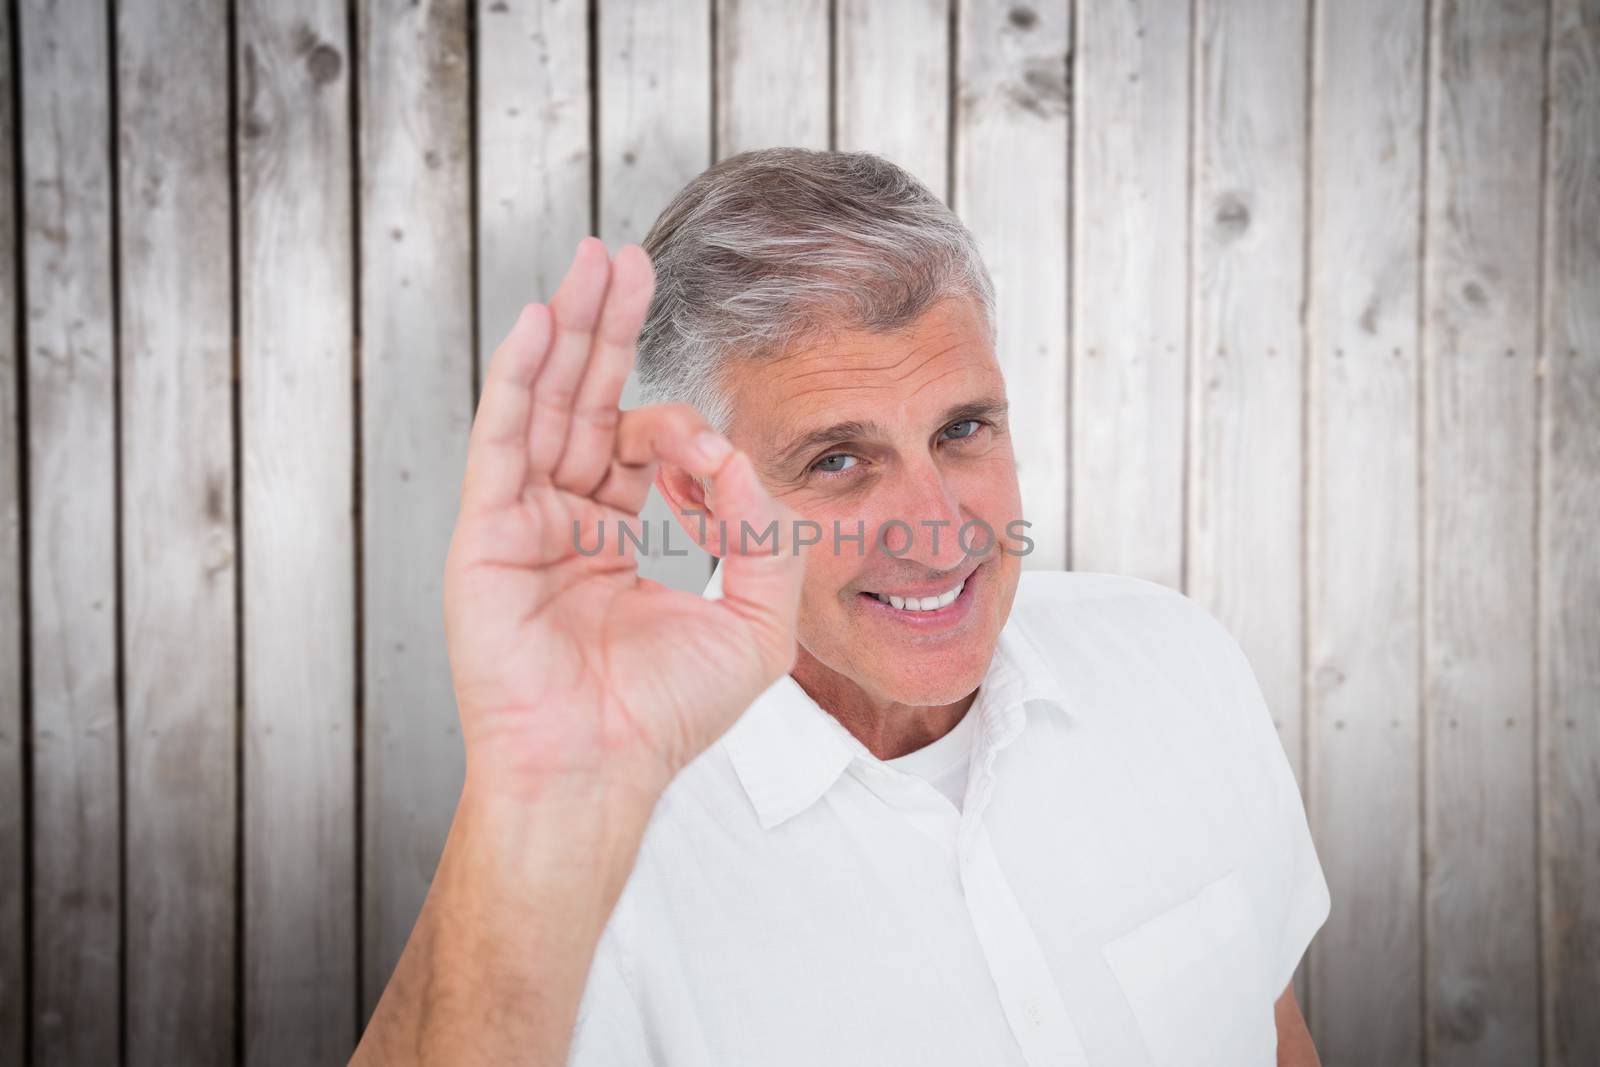 Casual man showing ok sign to camera against wooden planks